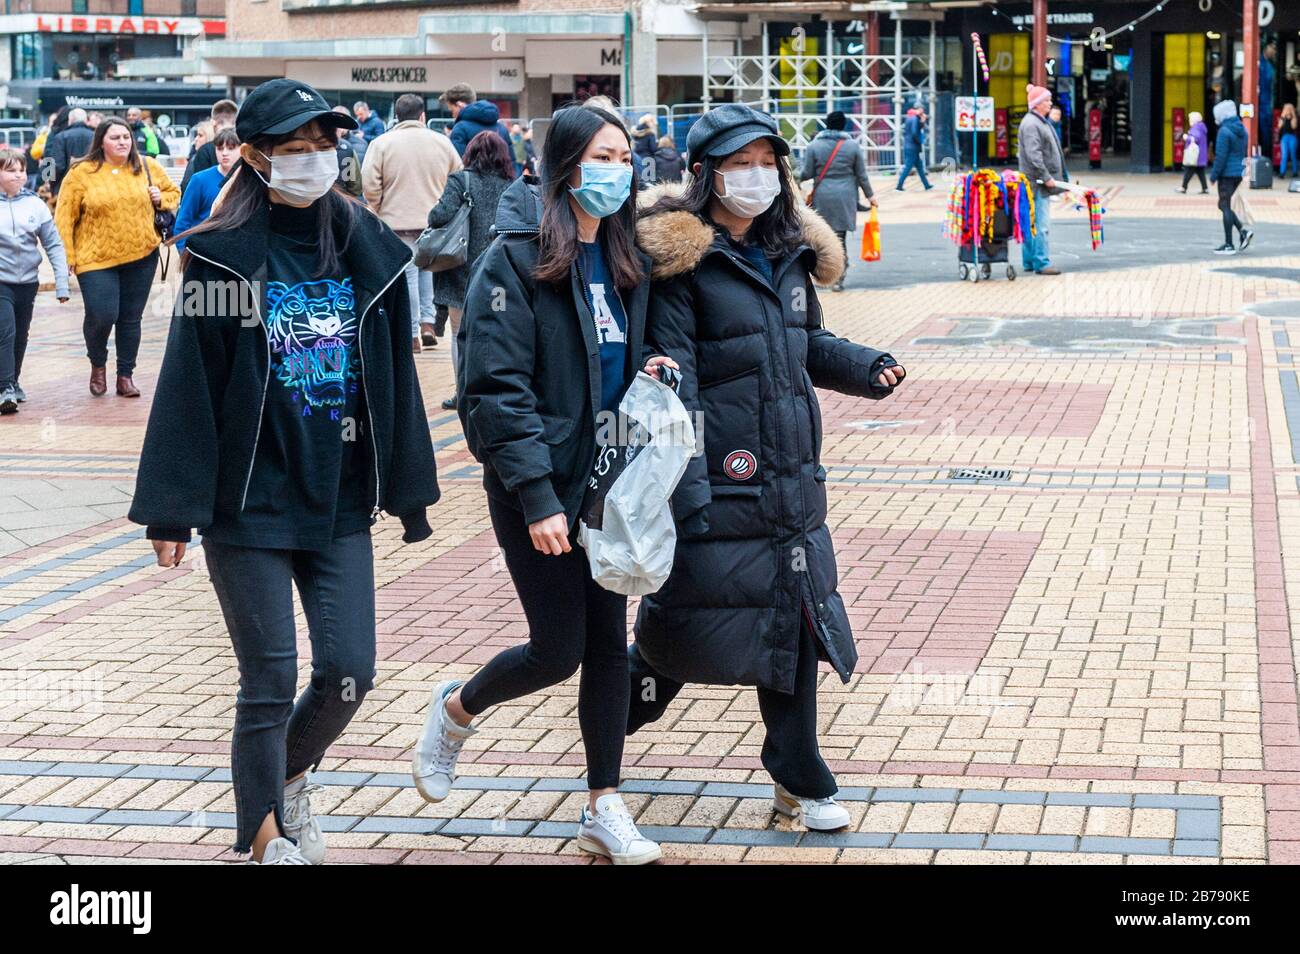 Coventry, West Midlands, UK. 14th Mar, 2020. The Coronavirus pandemic forced shoppers to wear protective masks in Coventry city centre this afternoon. Credit: Andy Gibson/Alamy Live News Stock Photo